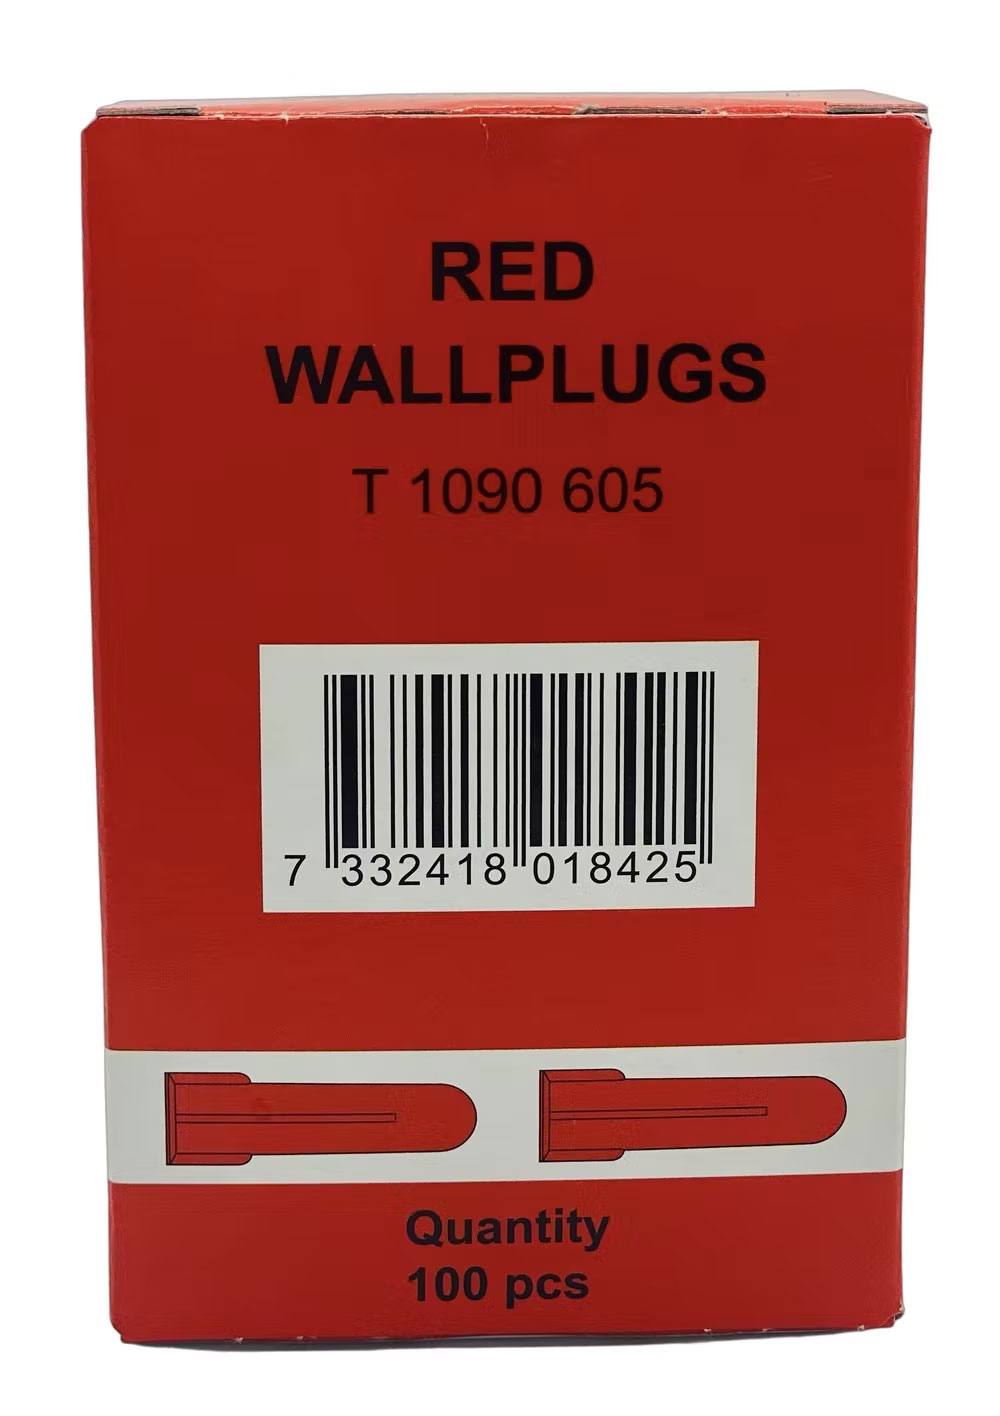 RED WALL PLUGS